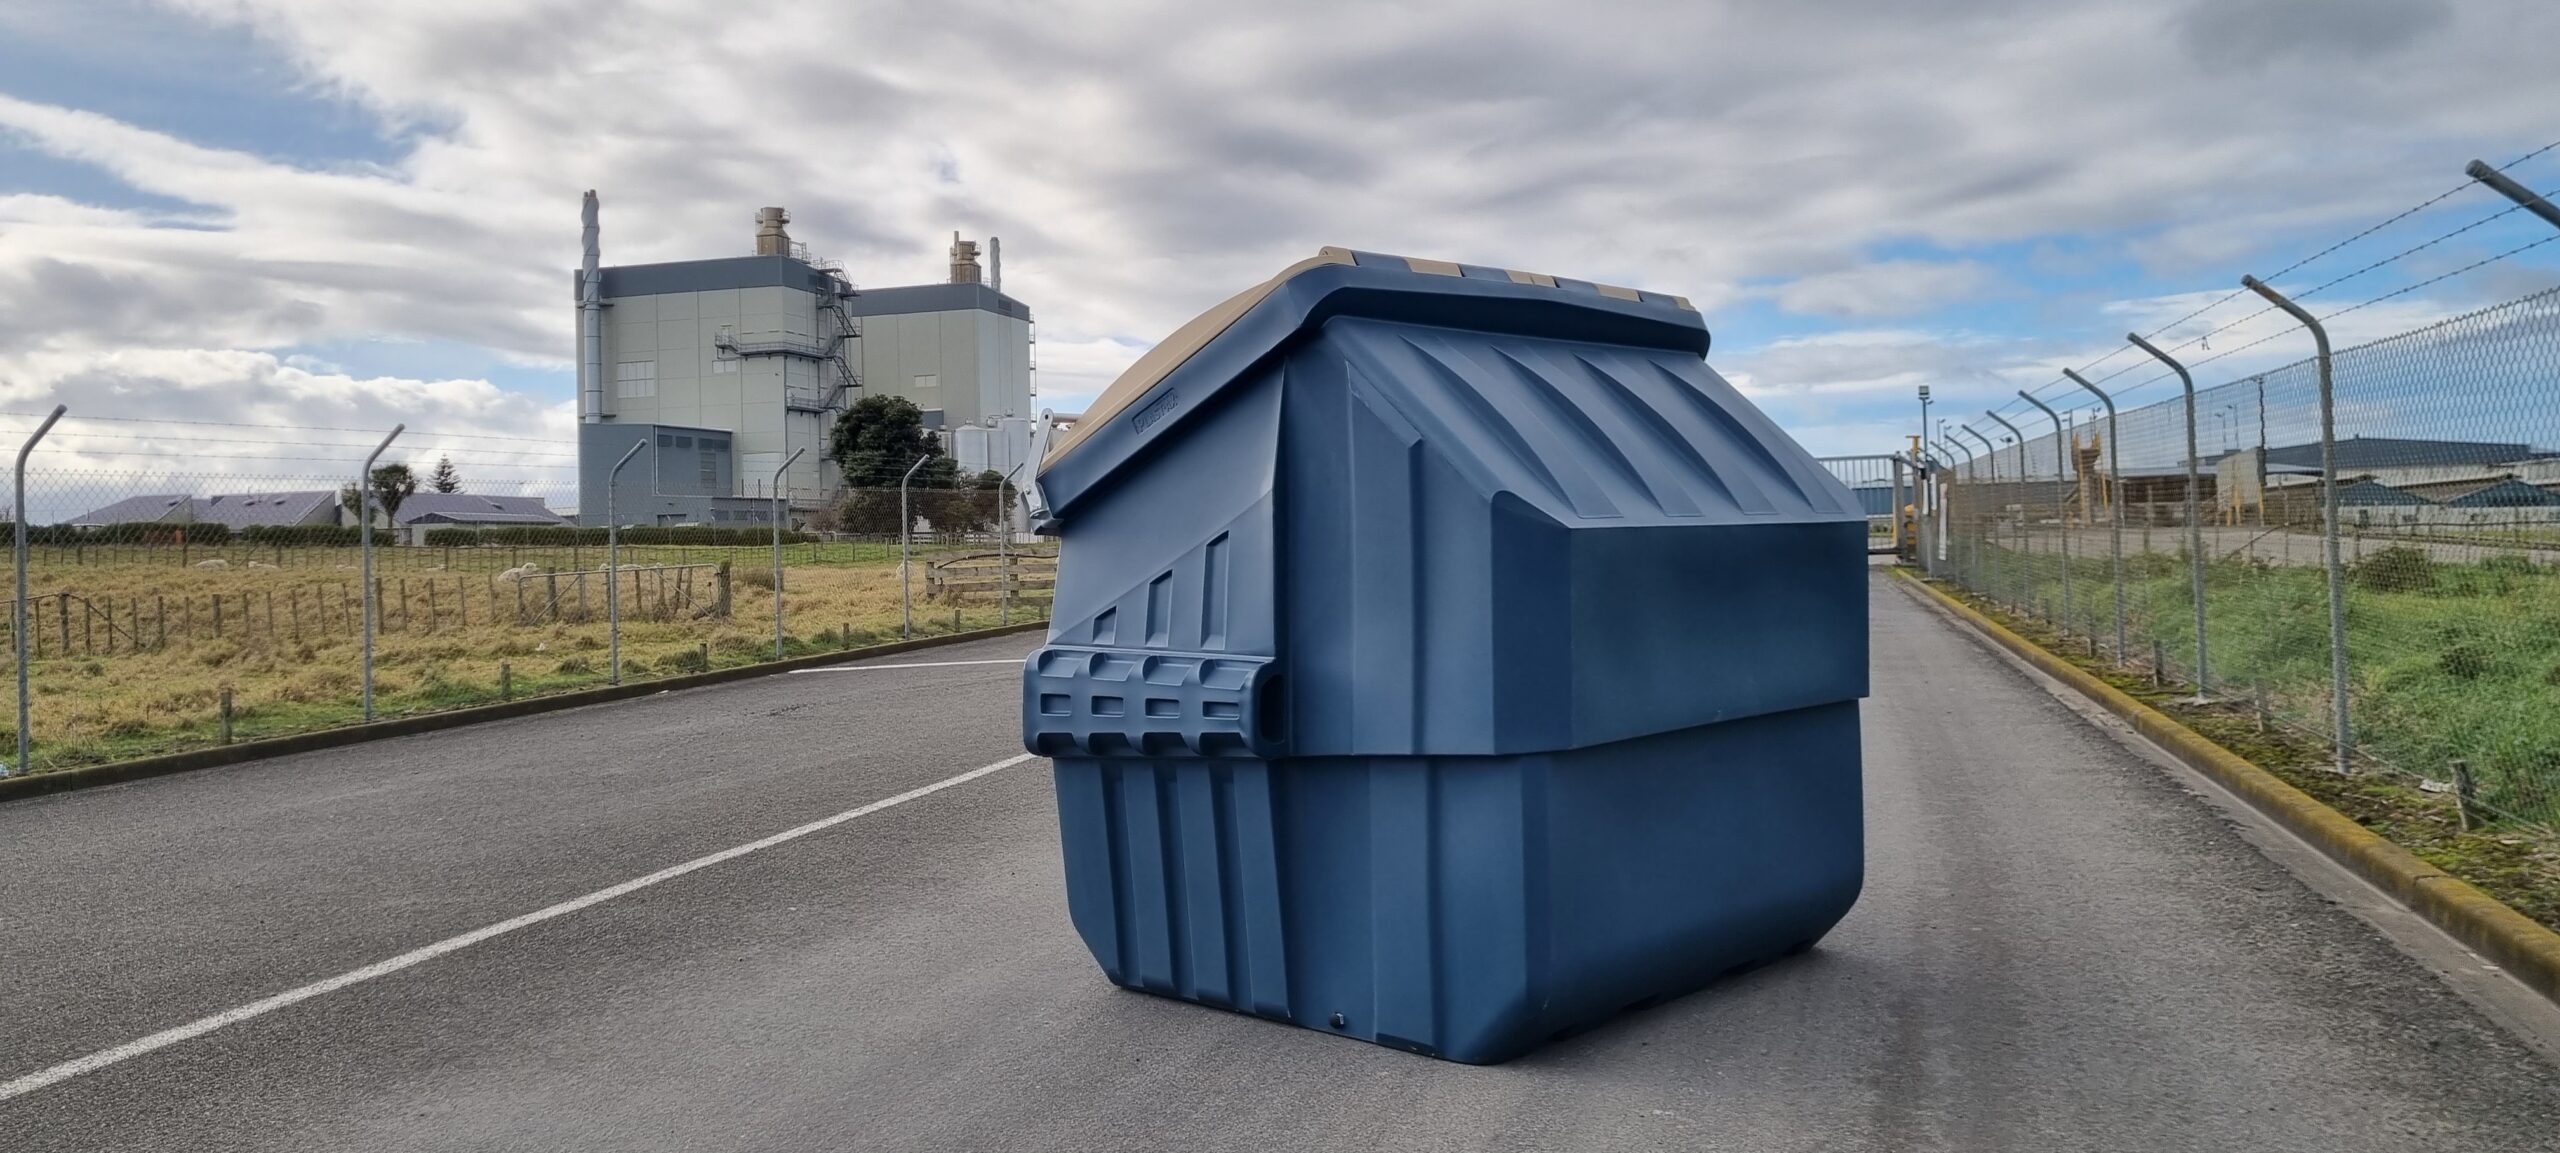 blue front load plastic bin recycling waste management factory